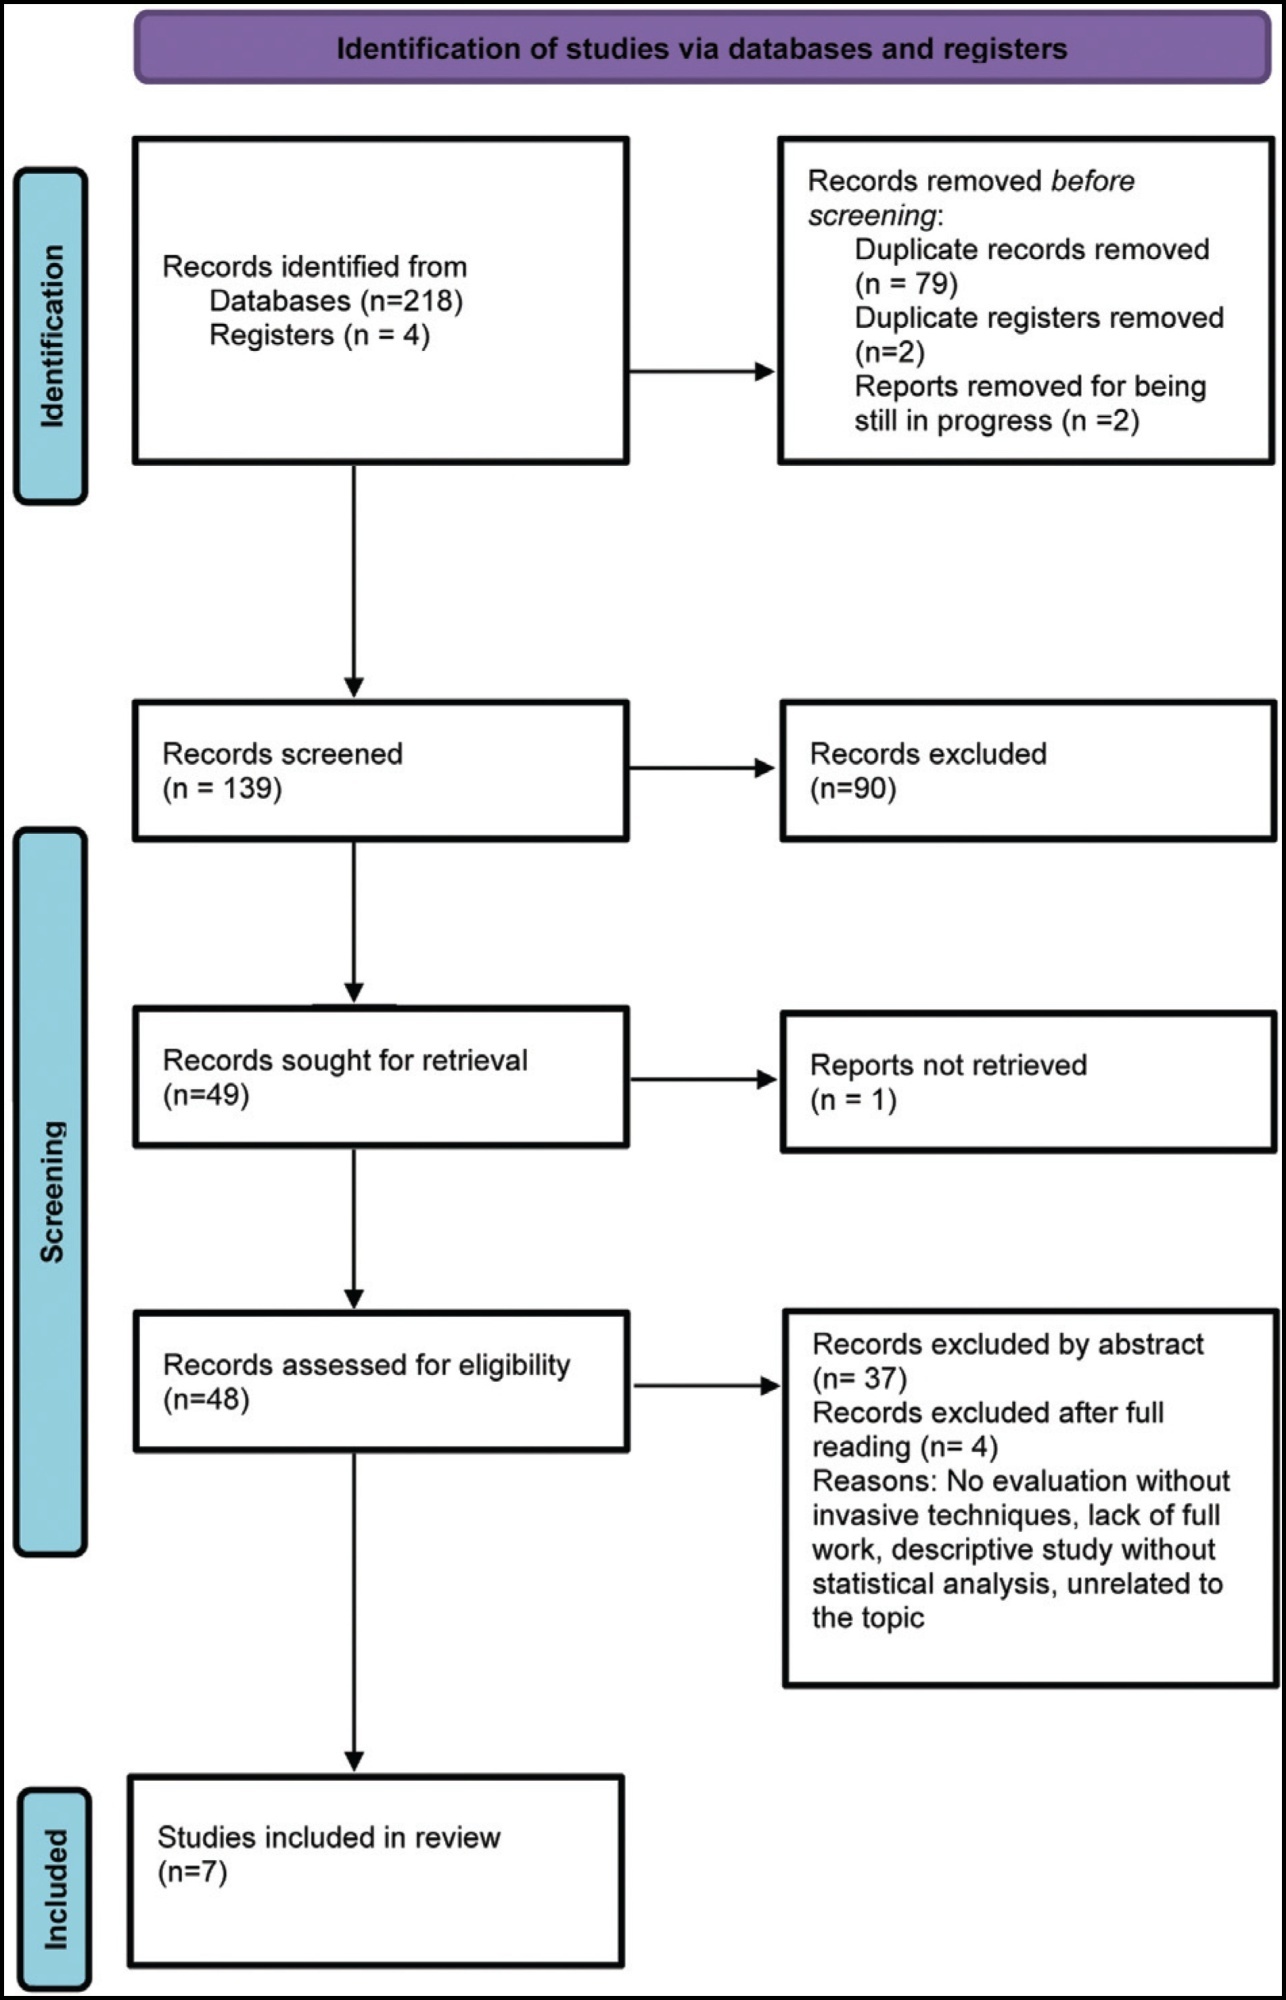 The Effect of Neuromodulatory Drugs on the Intensity of Chronic Pelvic Pain in Women: A Systematic Review